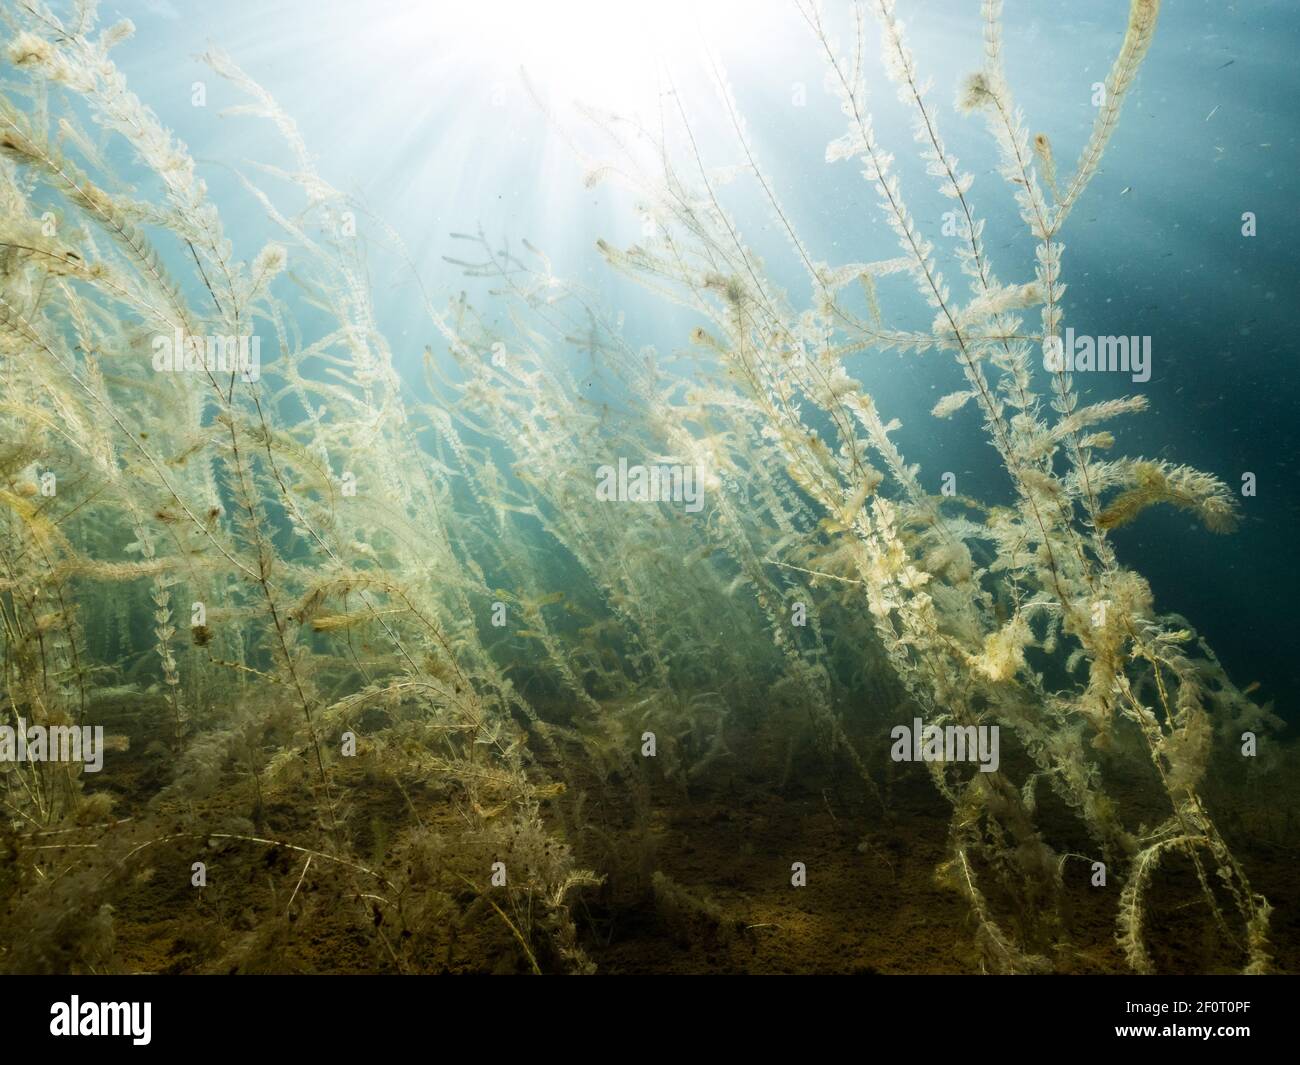 Stems of water-milfoil aquatic plant in late summer Stock Photo